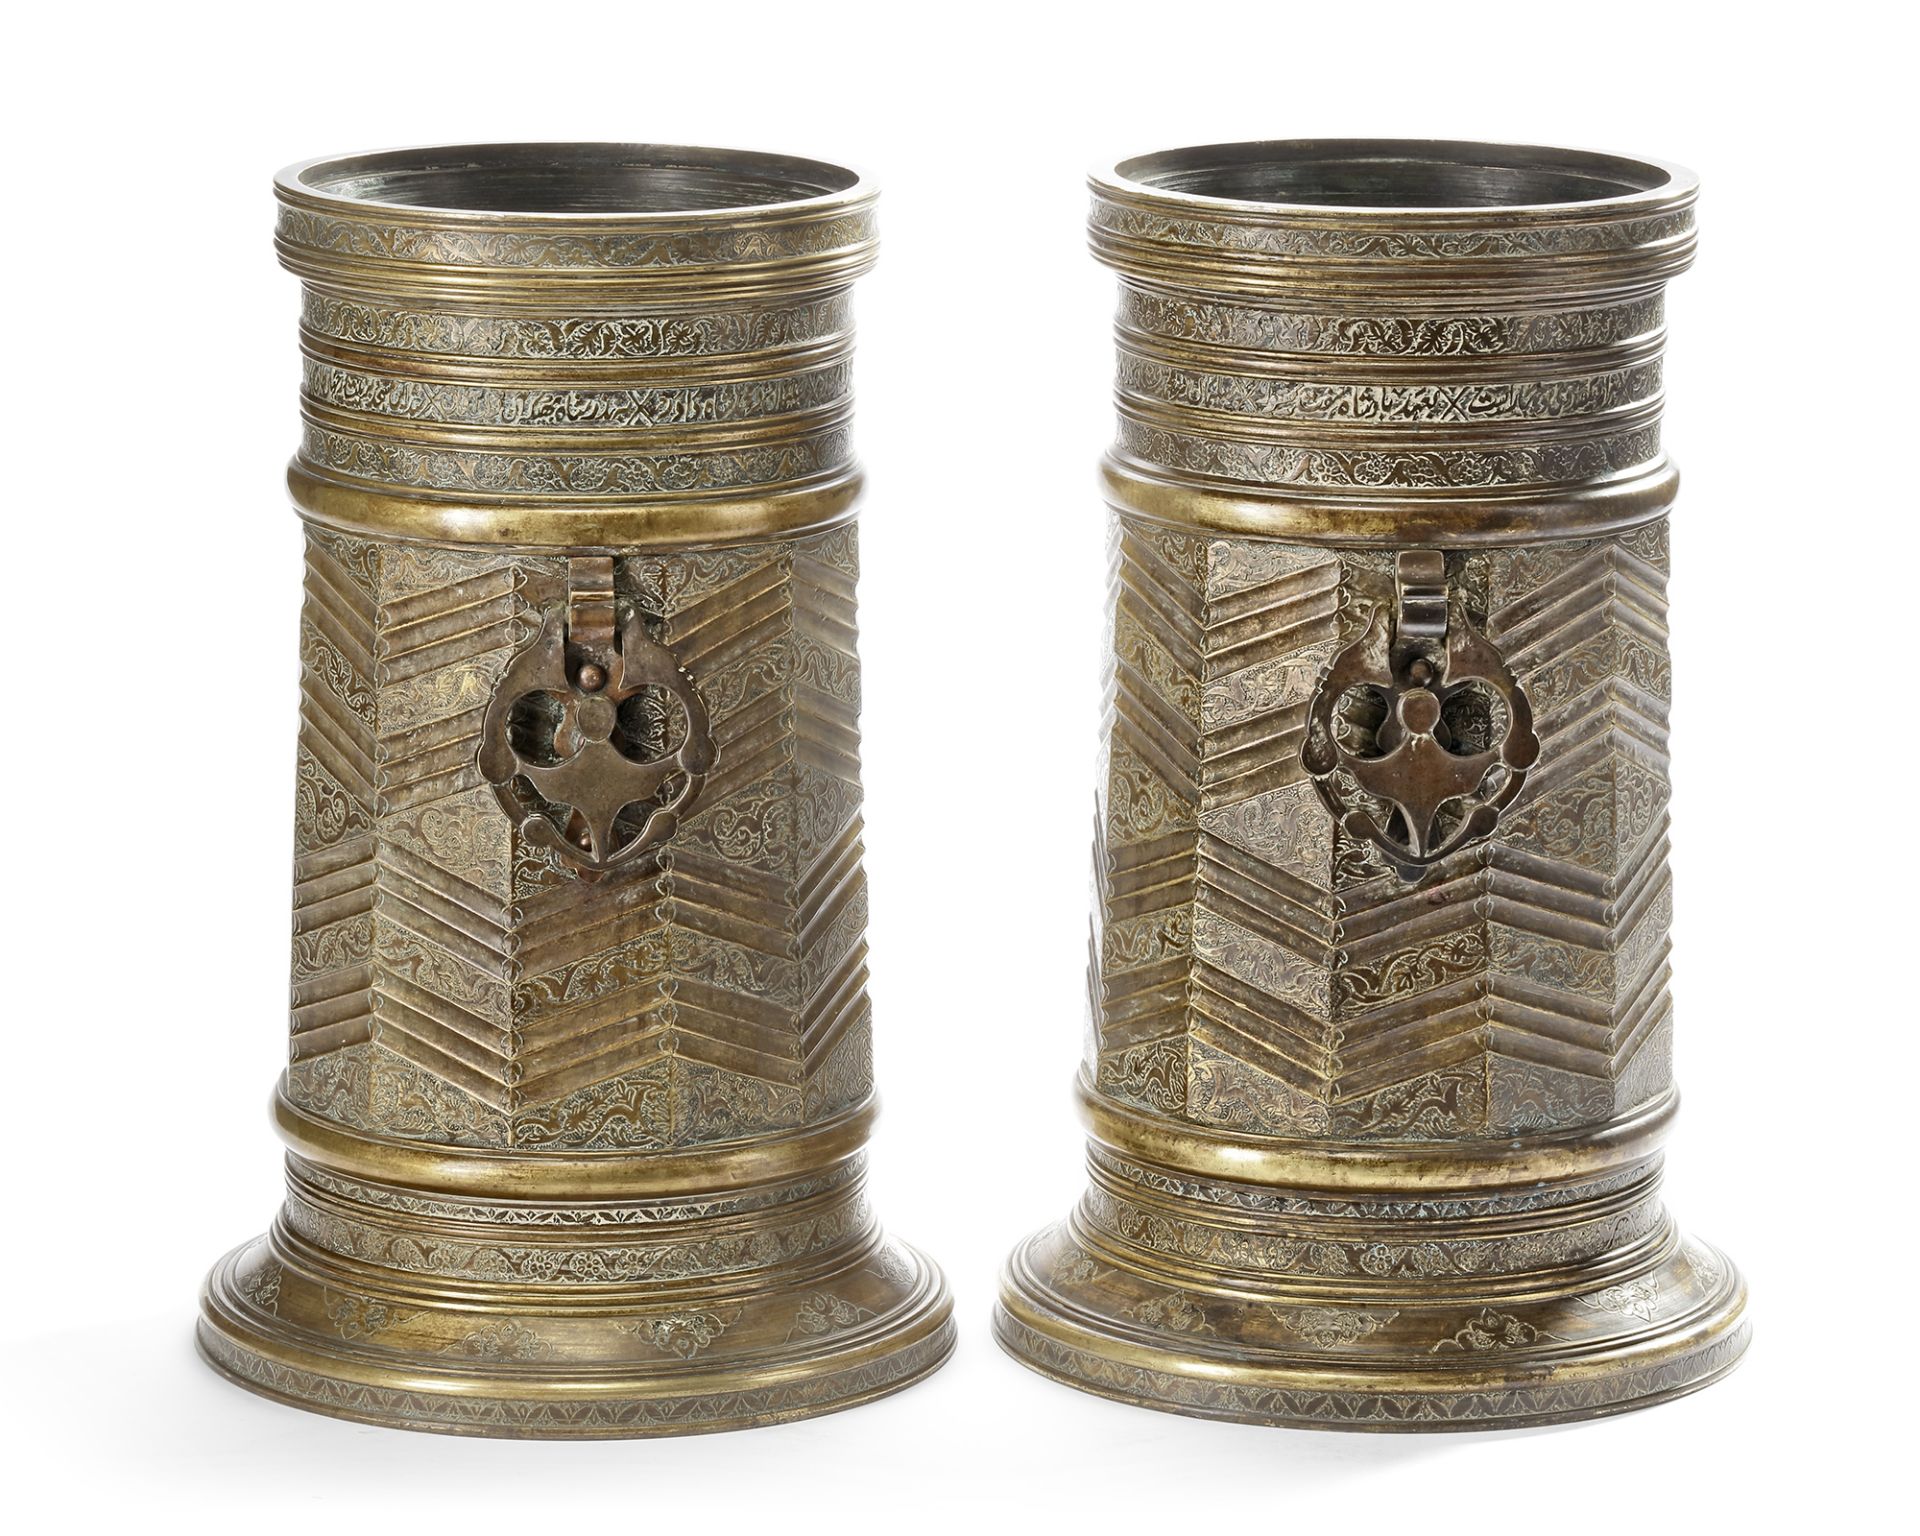 A PAIR LARGE OF SAFAVID STYLE ENGRAVED BRASS TORCH STANDS, PERSIA, 18TH -19TH CENTURY - Image 2 of 6